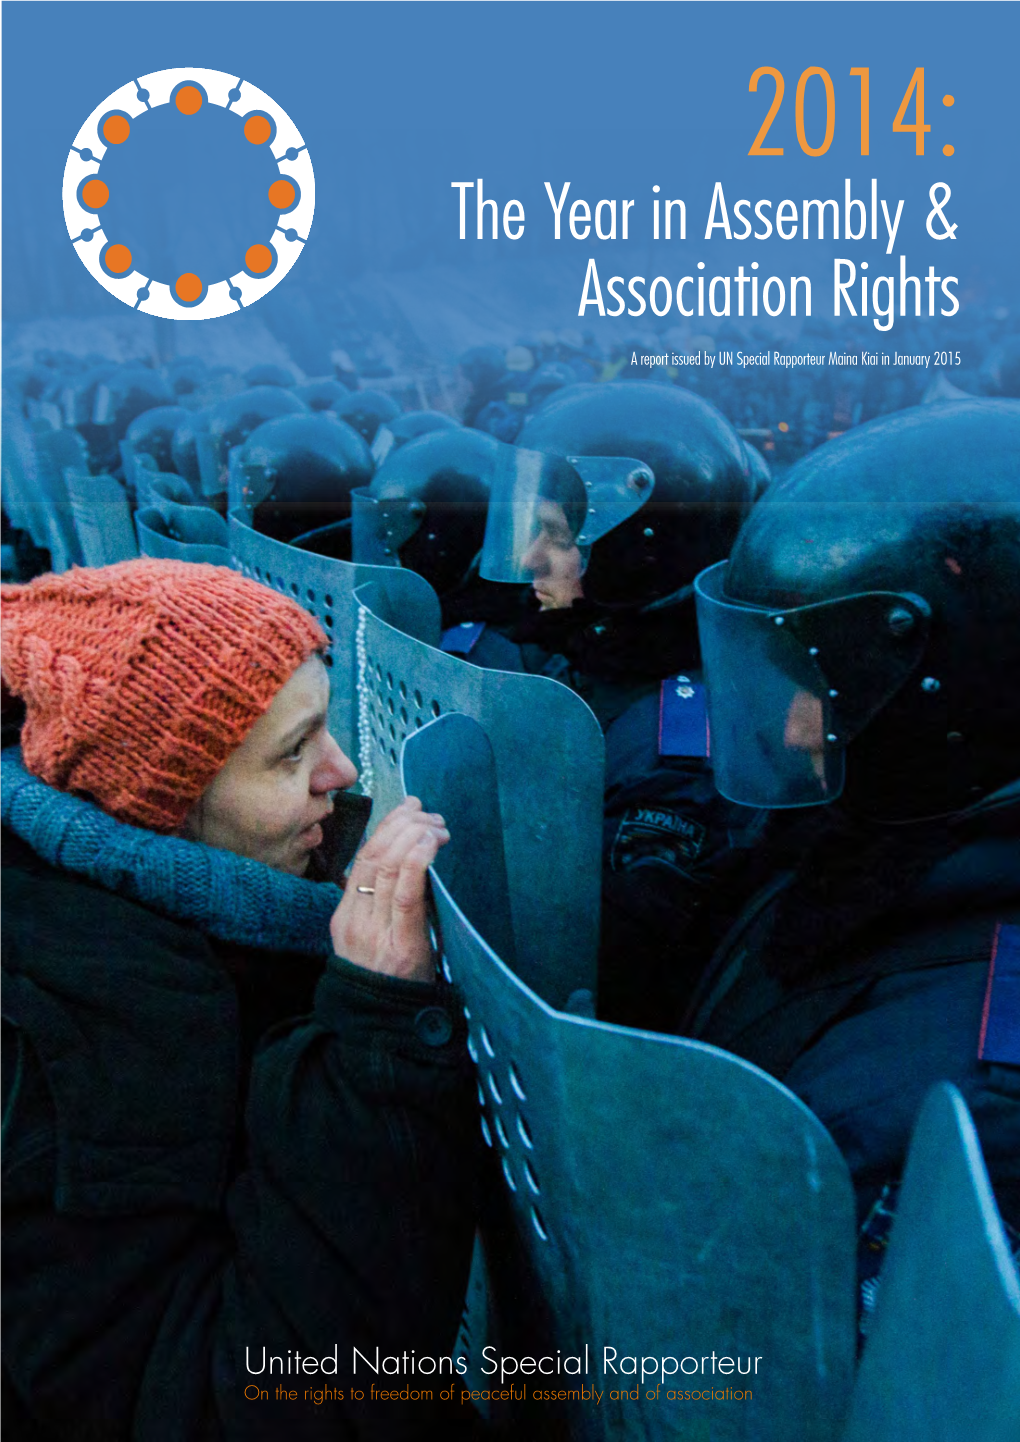 The Year in Assembly & Association Rights